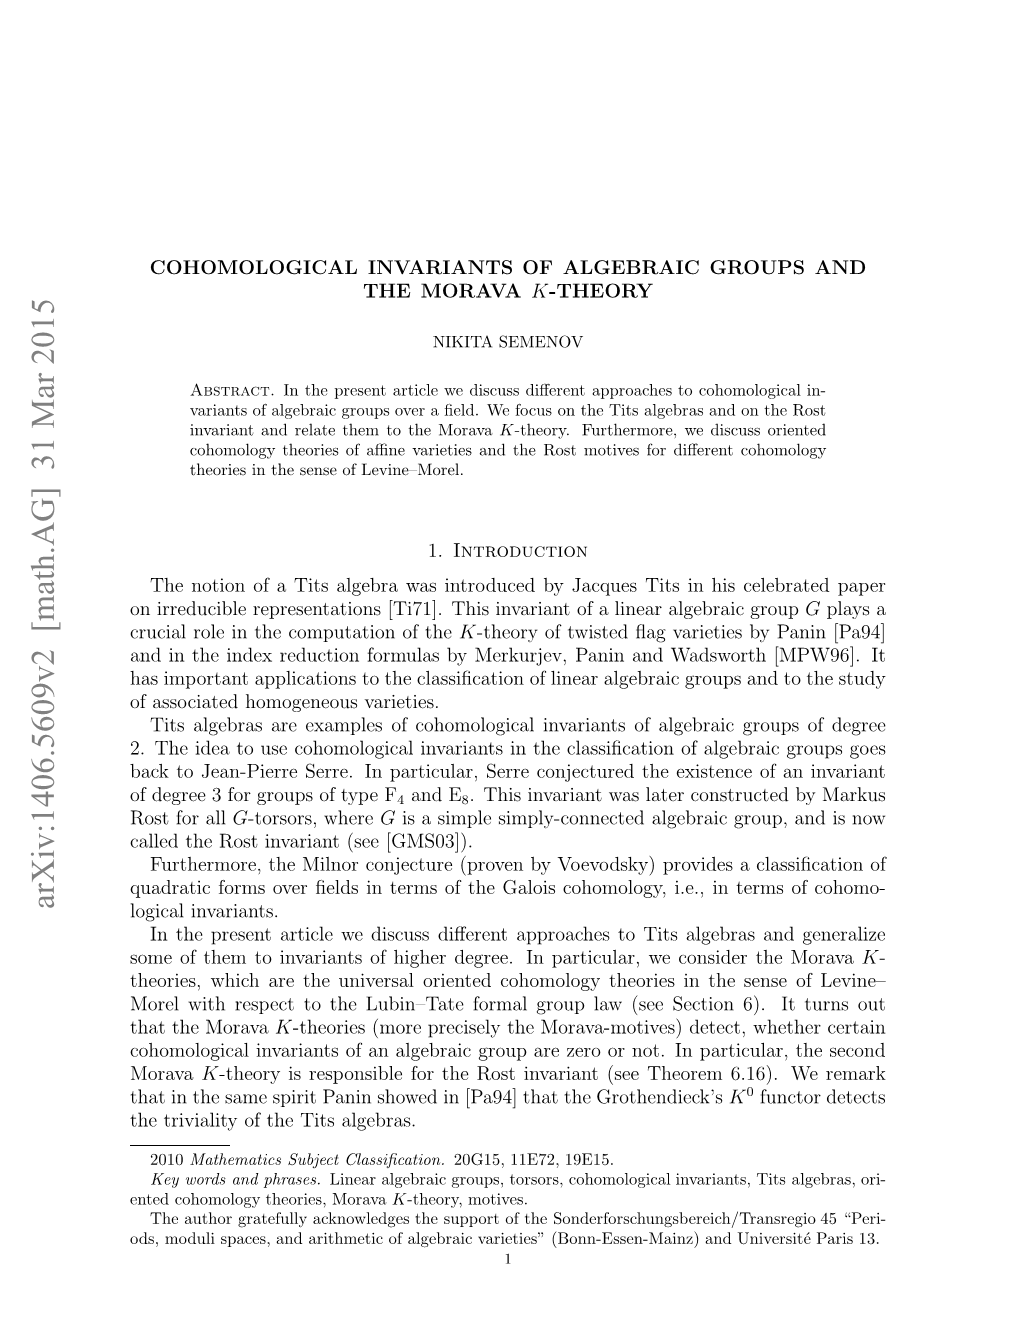 Cohomological Invariants of Algebraic Groups and the Morava K-Theory